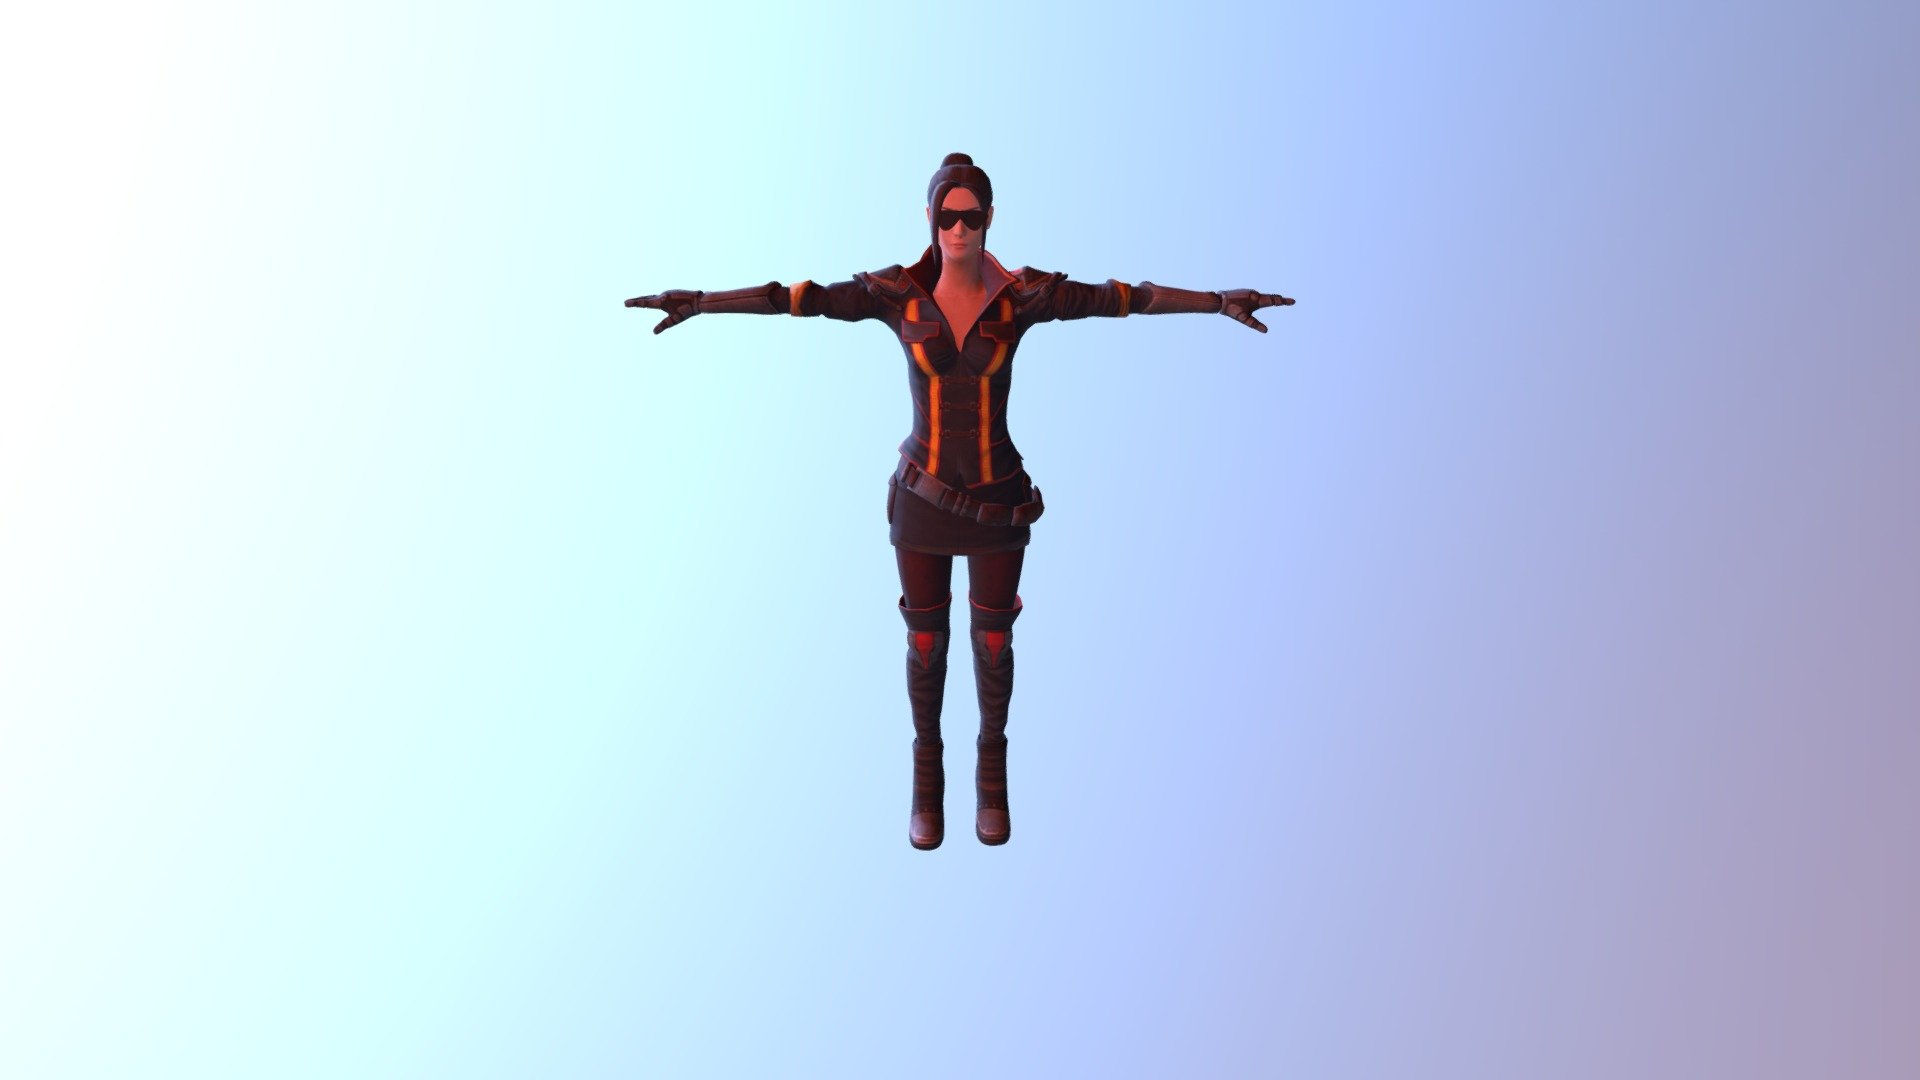 Super hero girl just like marvel heroes. fully rigged and animated.  This caharcter-model is game ready and can be used in any engine 3d model